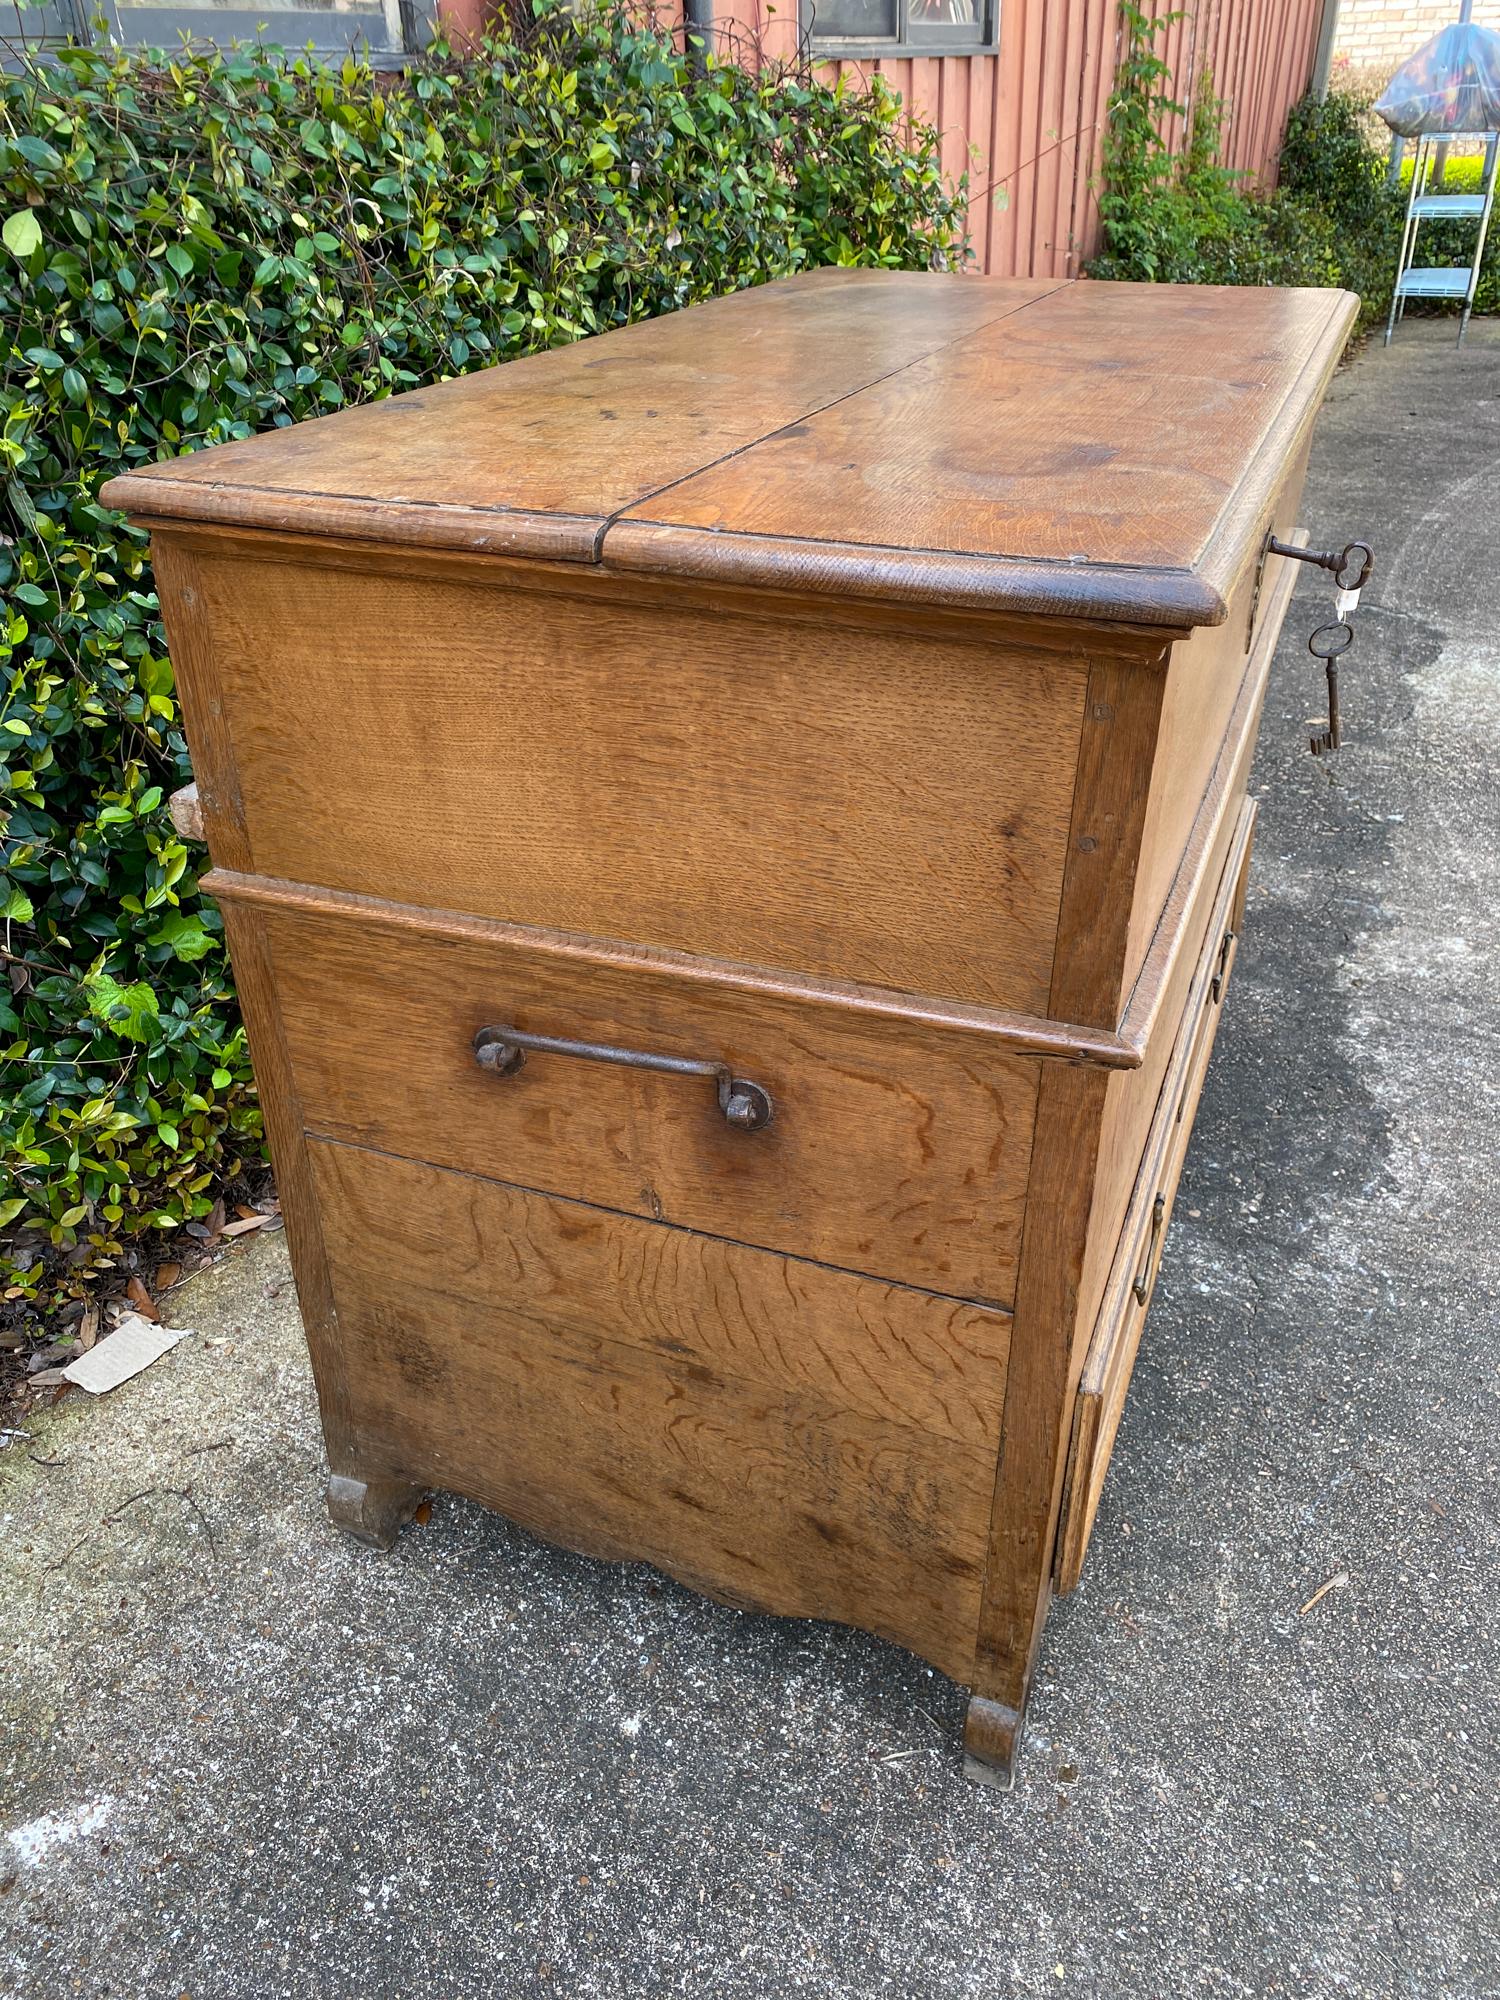 This is a 19th century chest with a hinged top and one lower drawer. Inside the chest is a large compartment accessed by lifting the hinged lid. The key for both the lid and the lower drawer are present and do work in their respective locks. The